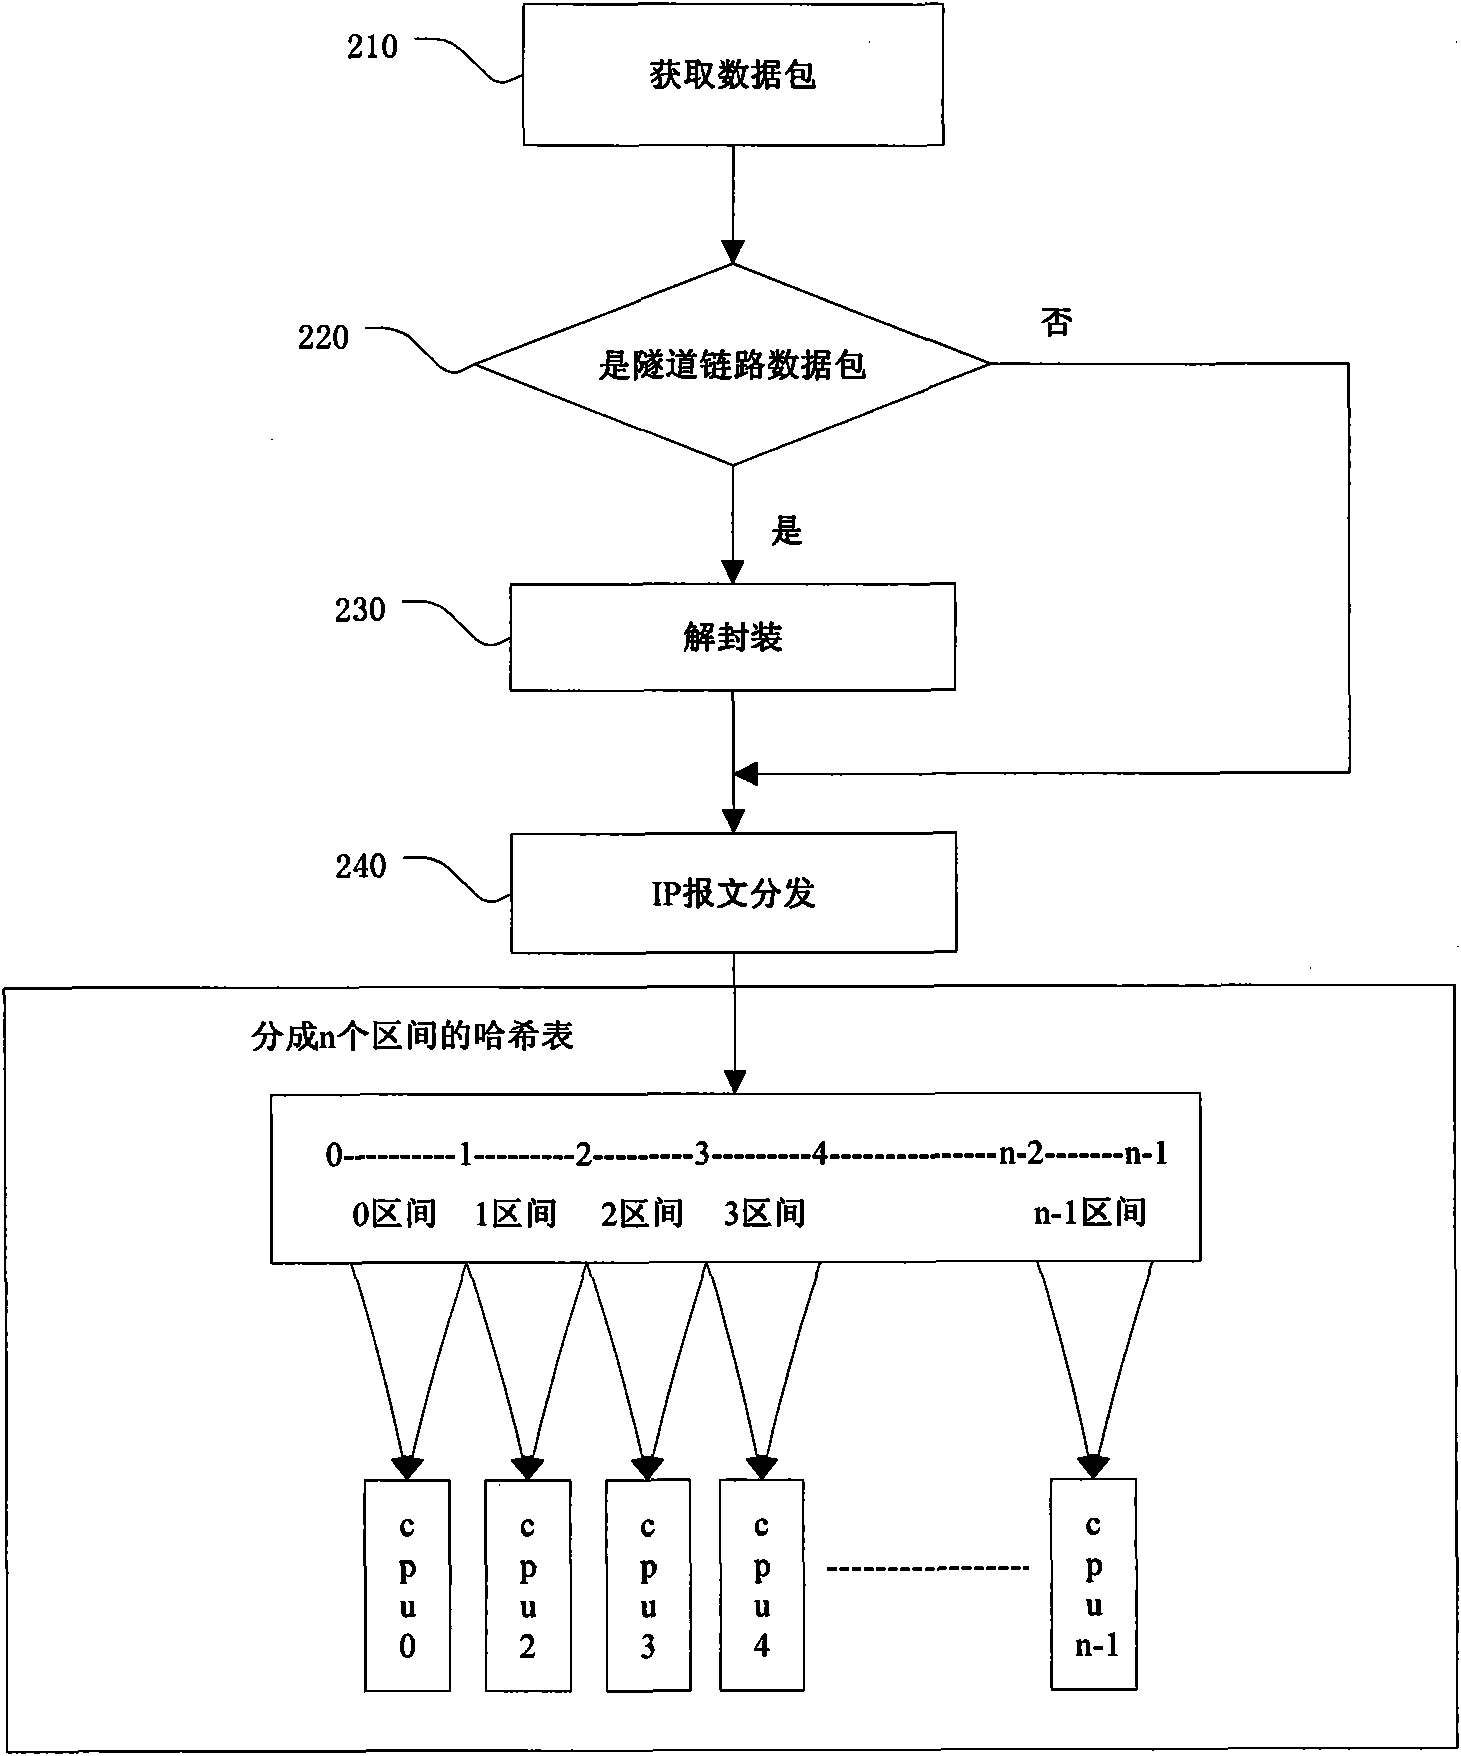 Message retransmission method and system based on multi-core architecture